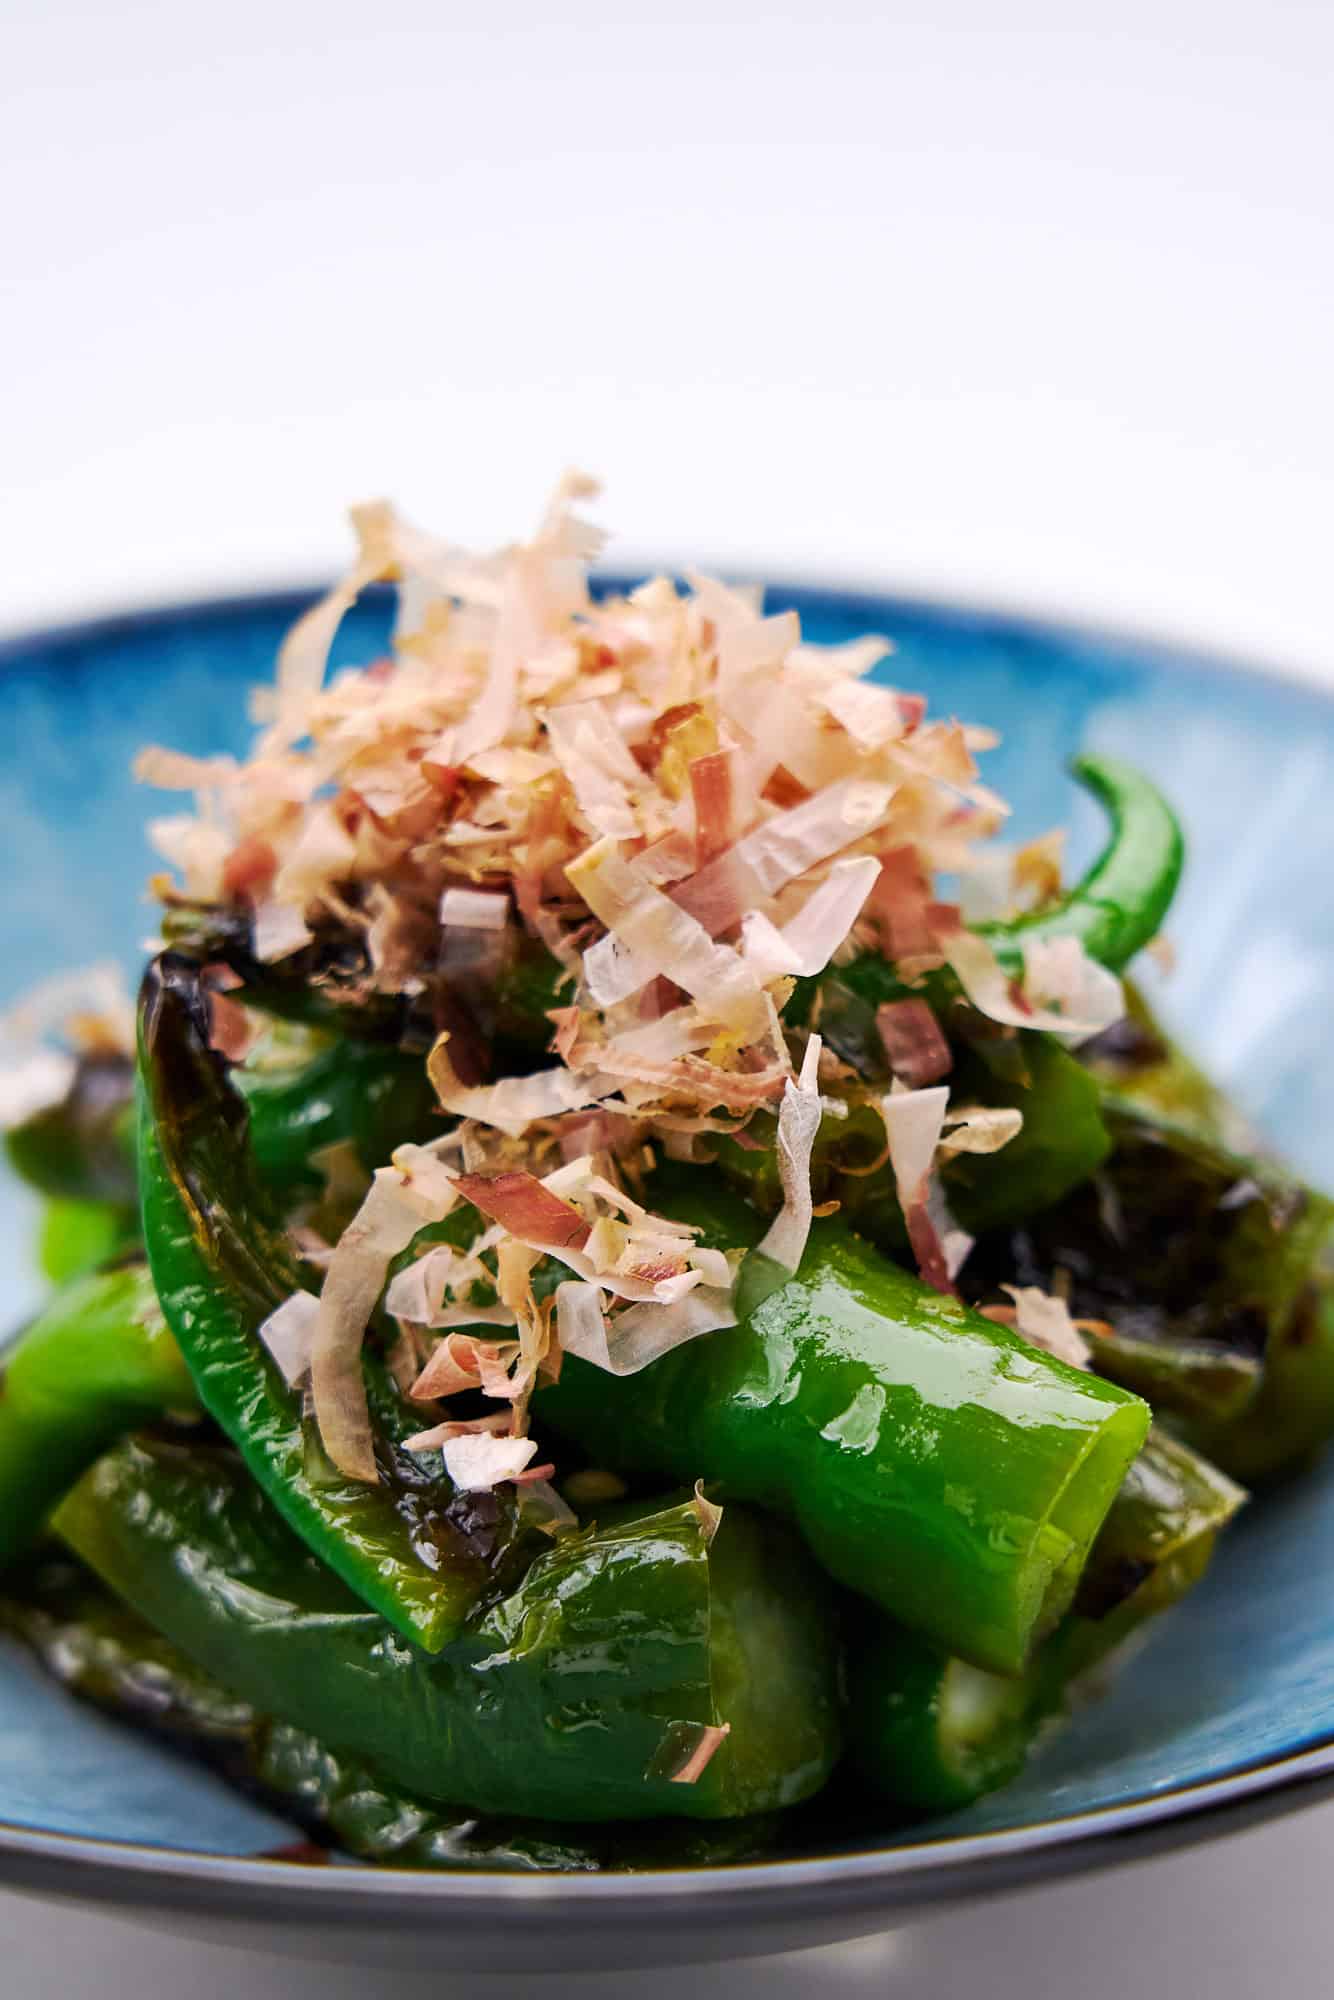 Grilled manganji peppers seasoned with olive oil and lemon juice, topped with katsuobushi.